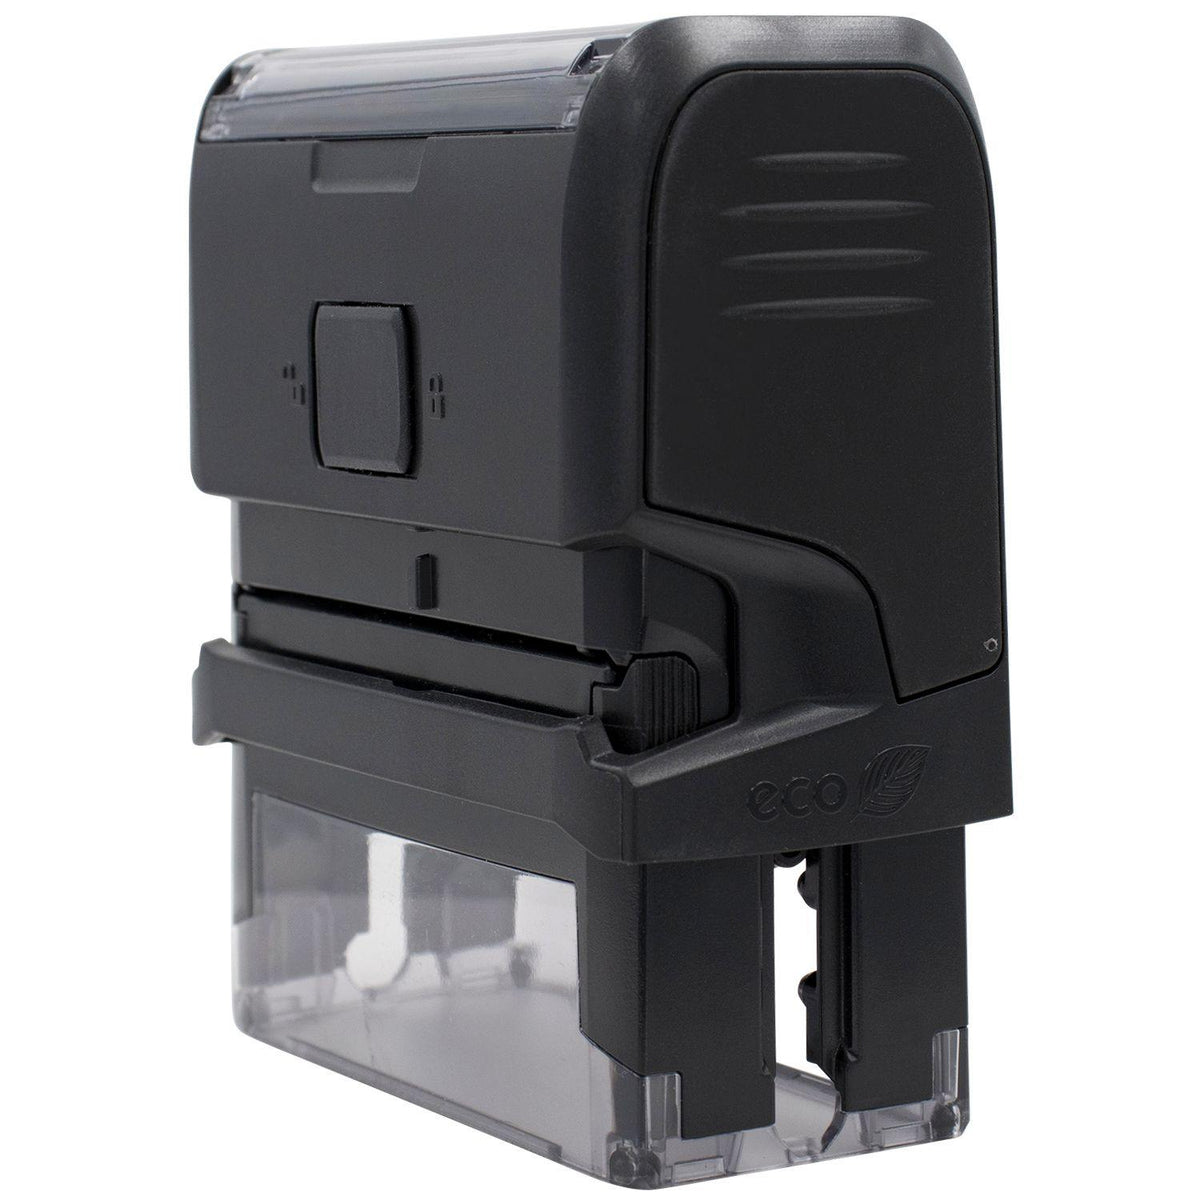 Large Self Inking Notice Of Action Stamp - Engineer Seal Stamps - Brand_Trodat, Impression Size_Large, Stamp Type_Self-Inking Stamp, Type of Use_Professional